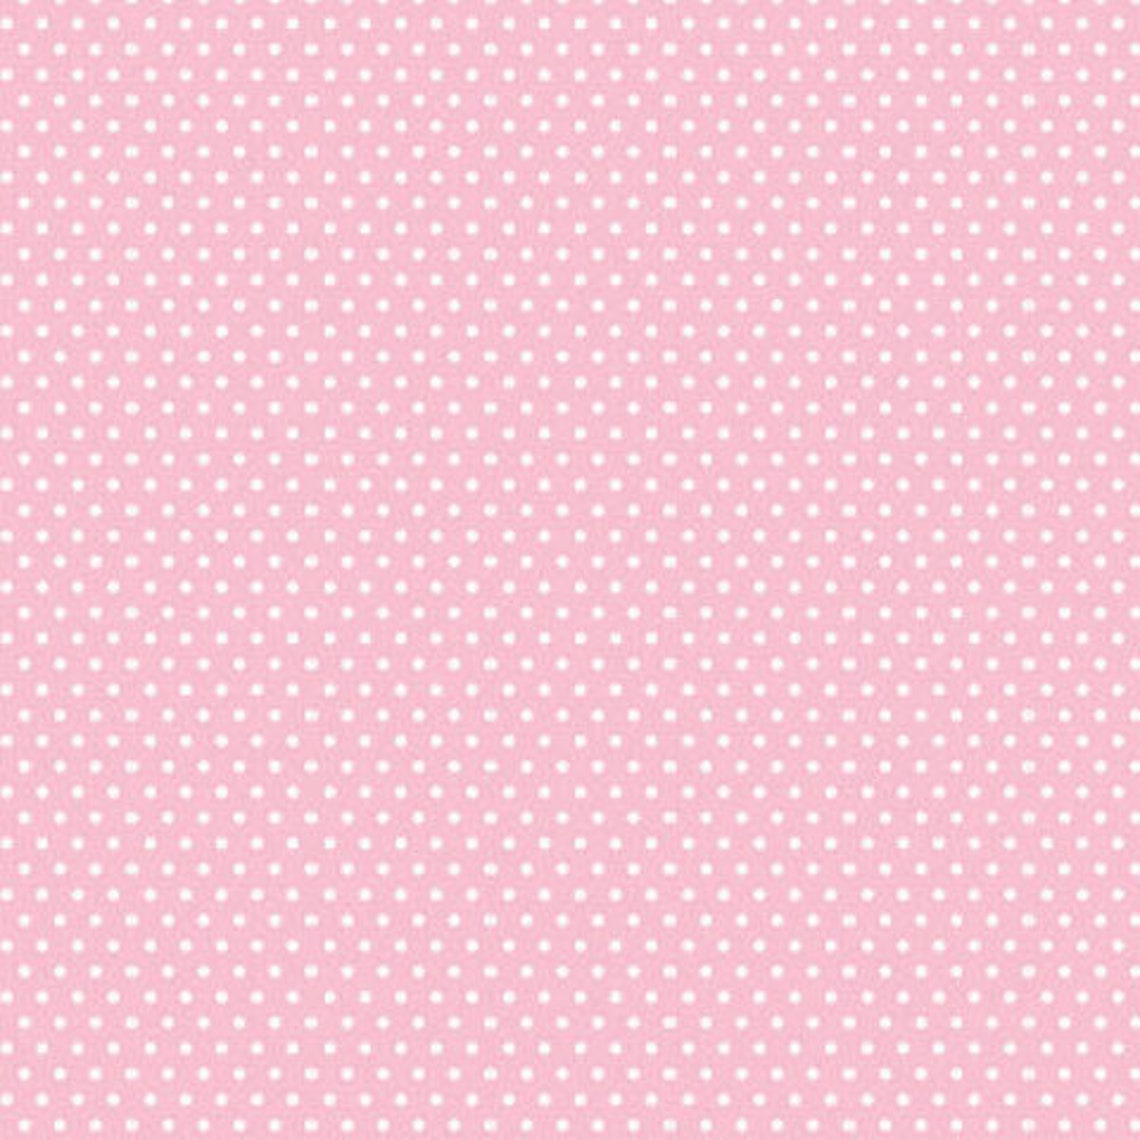 12 x 12 Patterned Cardstock: Light Pink Small Dots 12 Sheets | Etsy